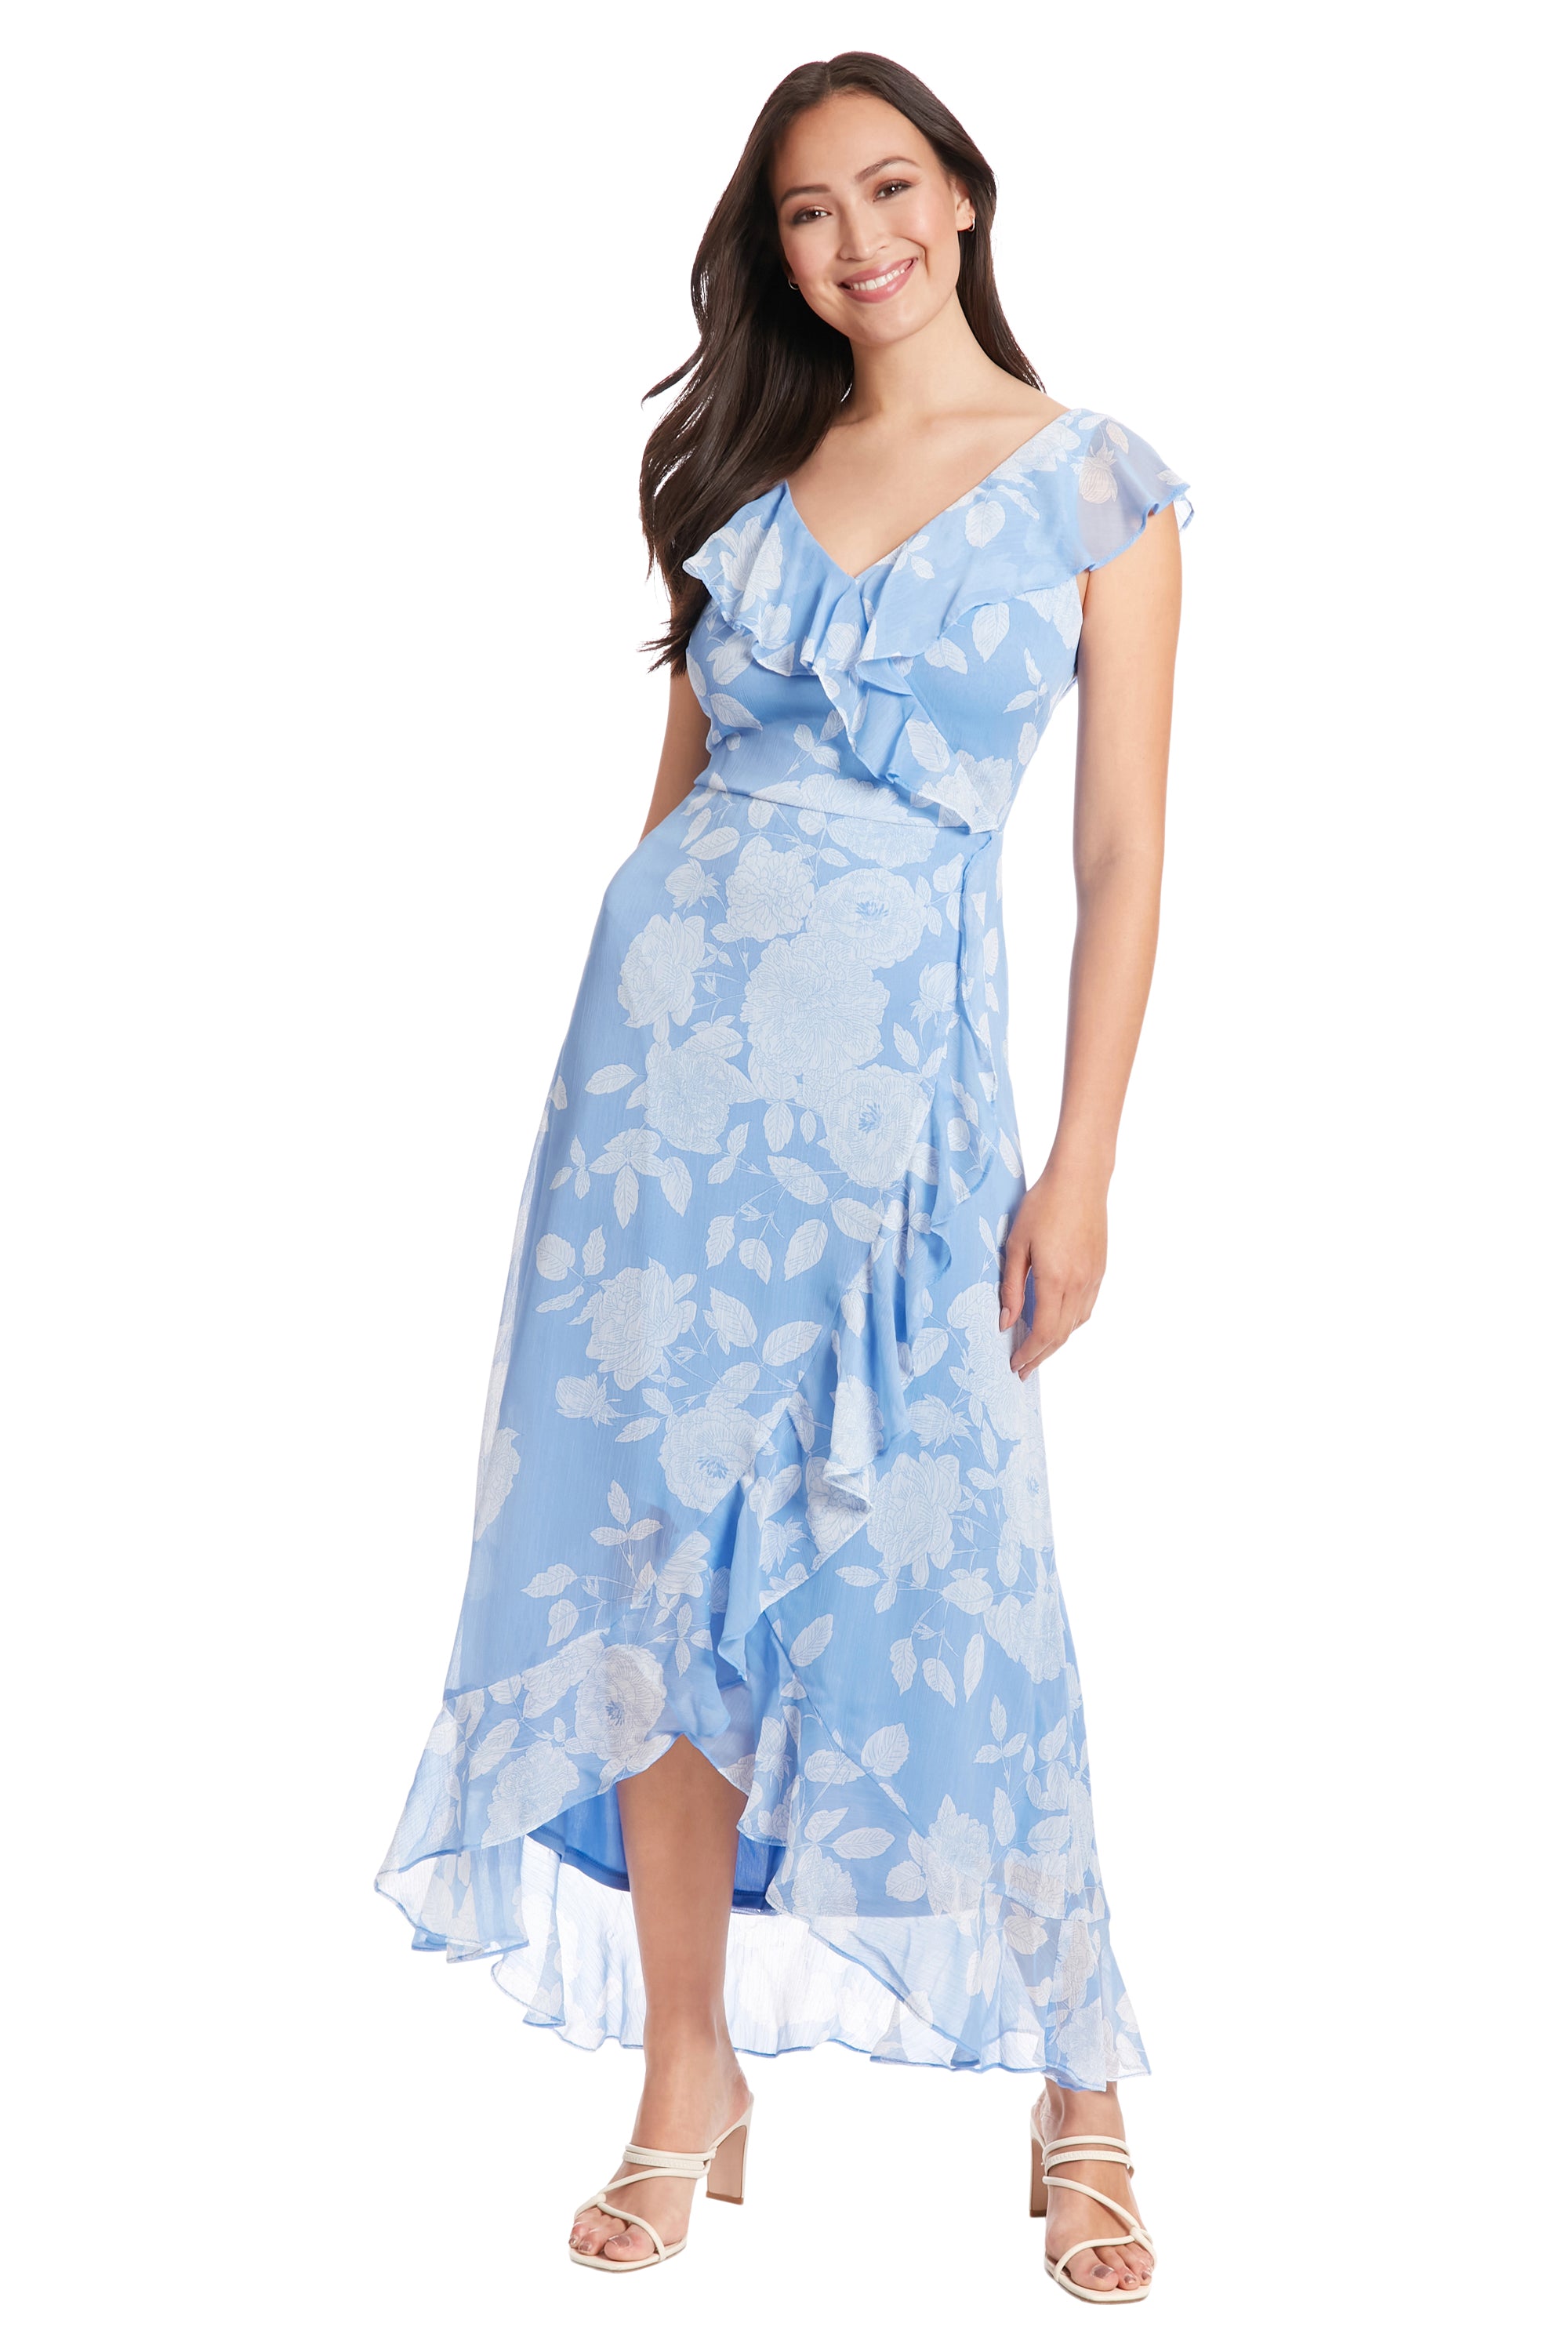 Sienna Sky Womens Dress Small Blue Floral Fit and Flare V-Neck